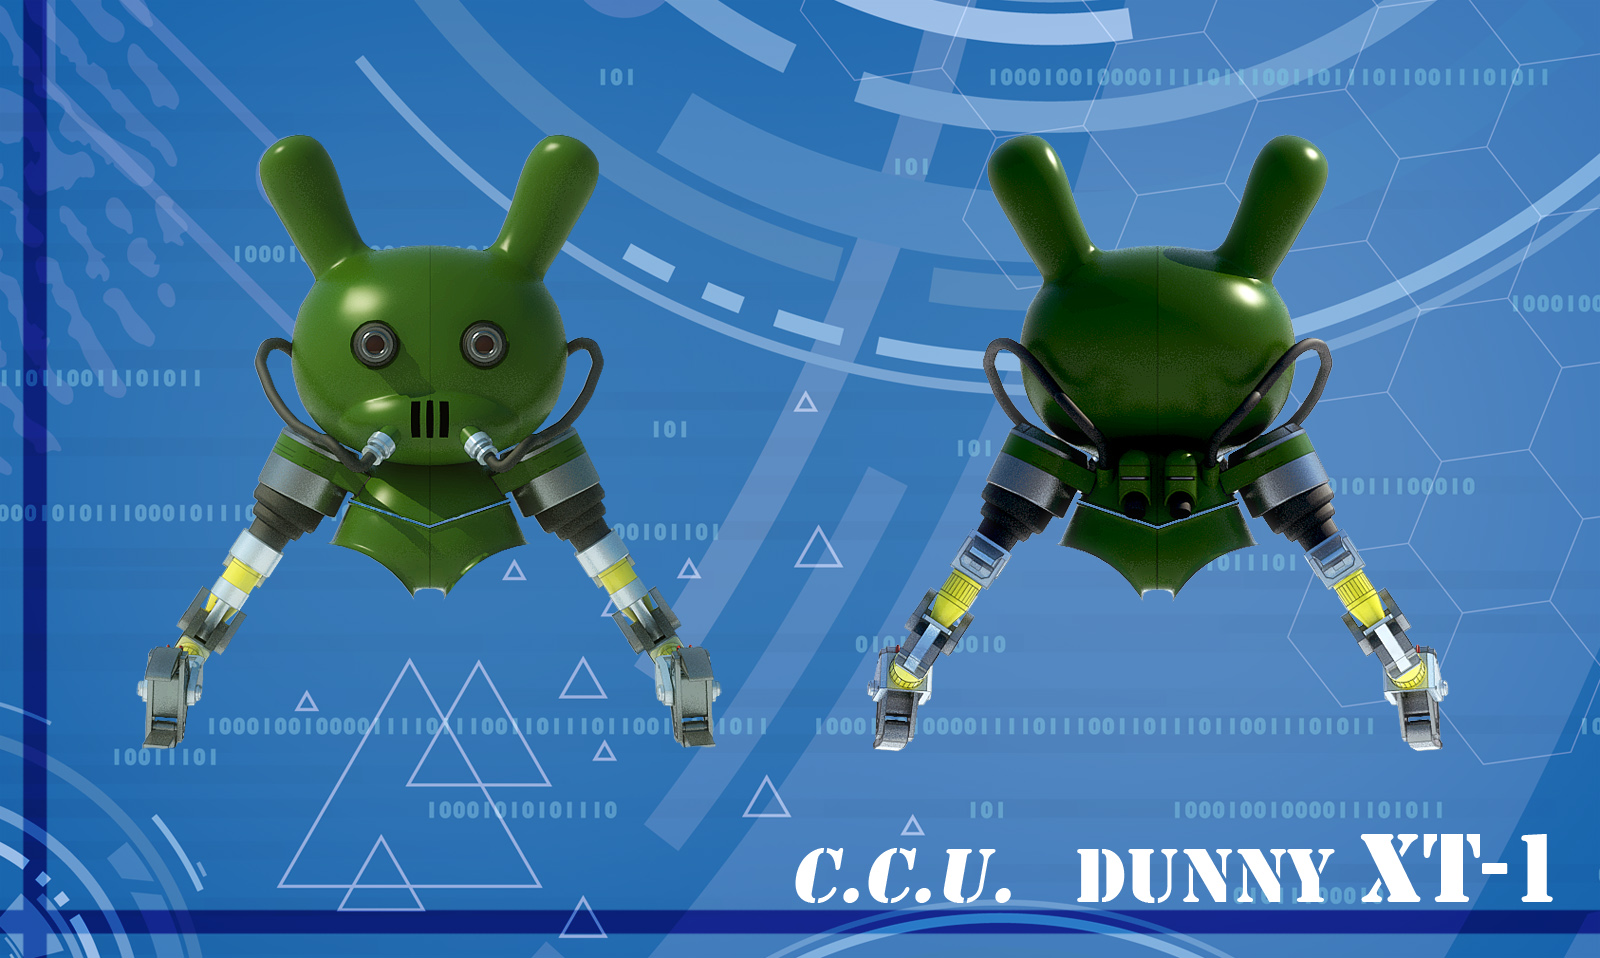 wip of the dunny XT-1